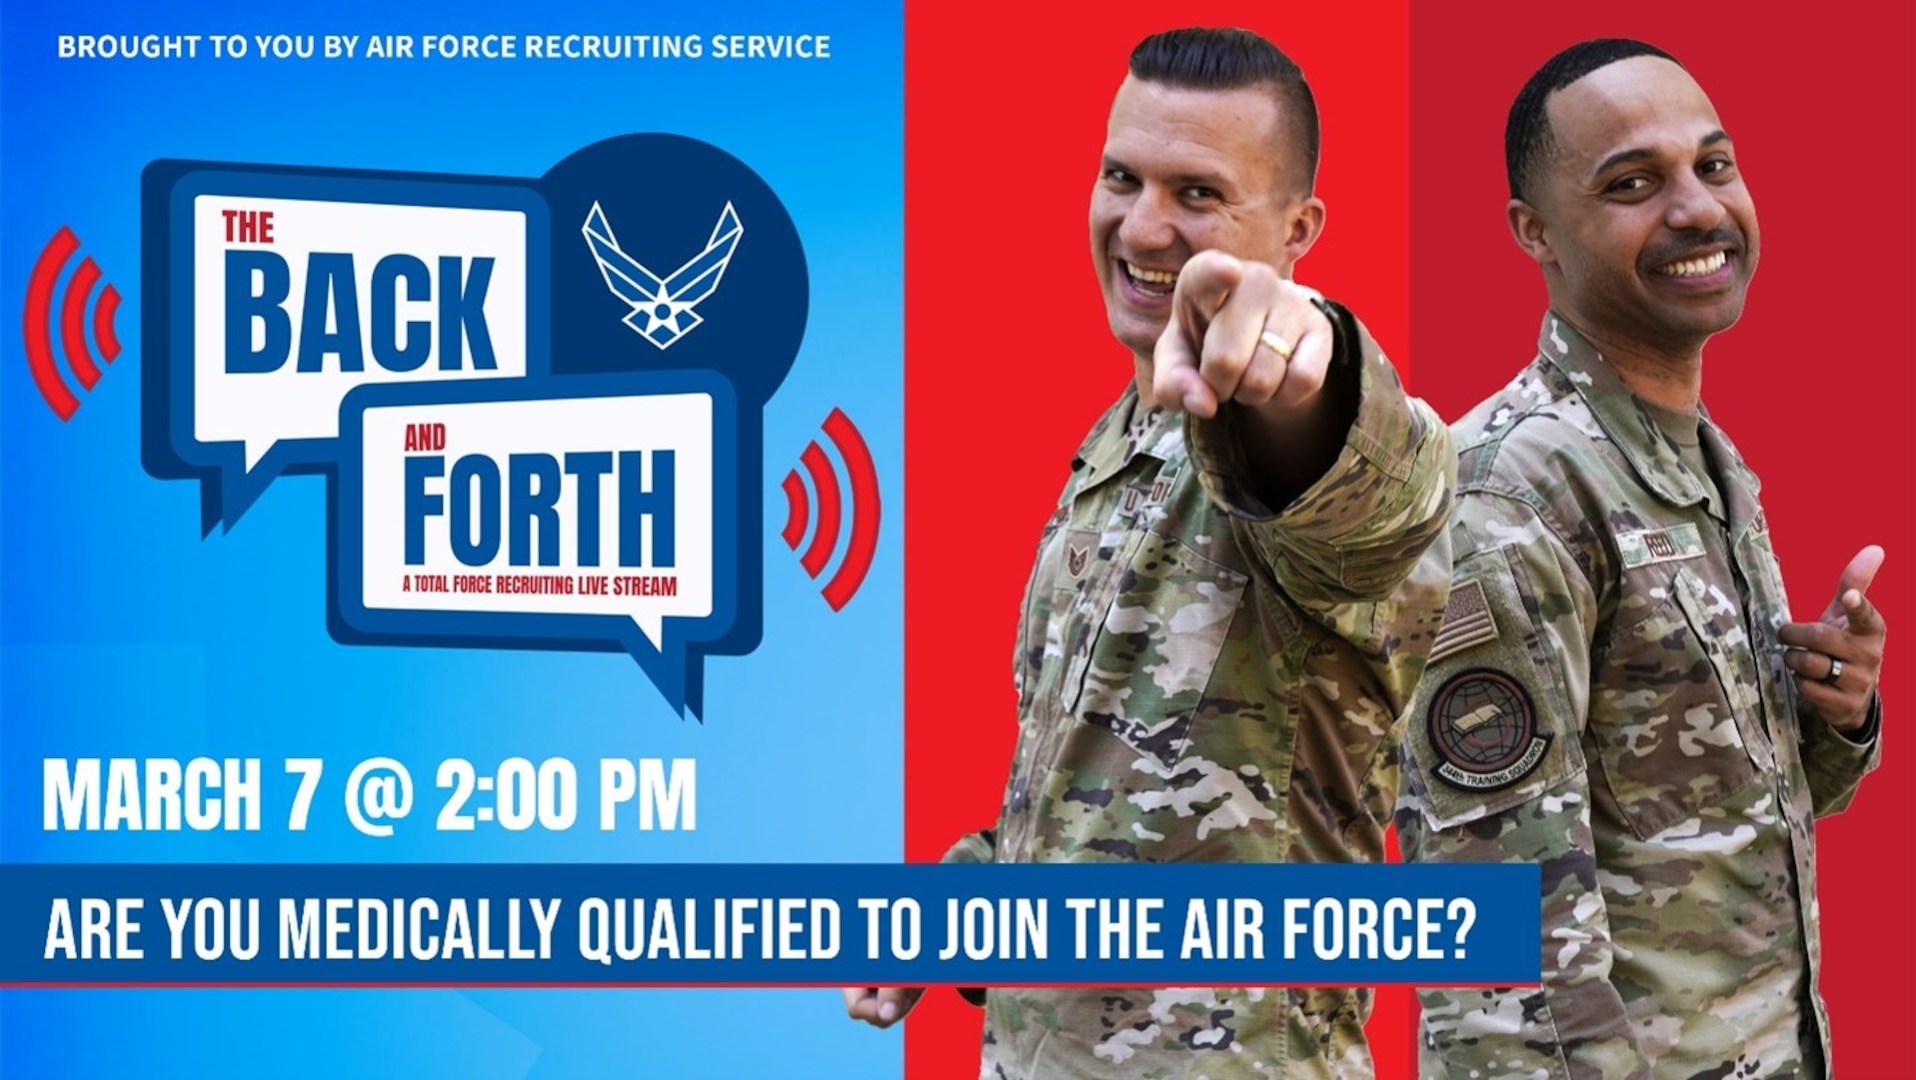 AFRS launches live stream to go ‘back and forth’ with recruits > Joint